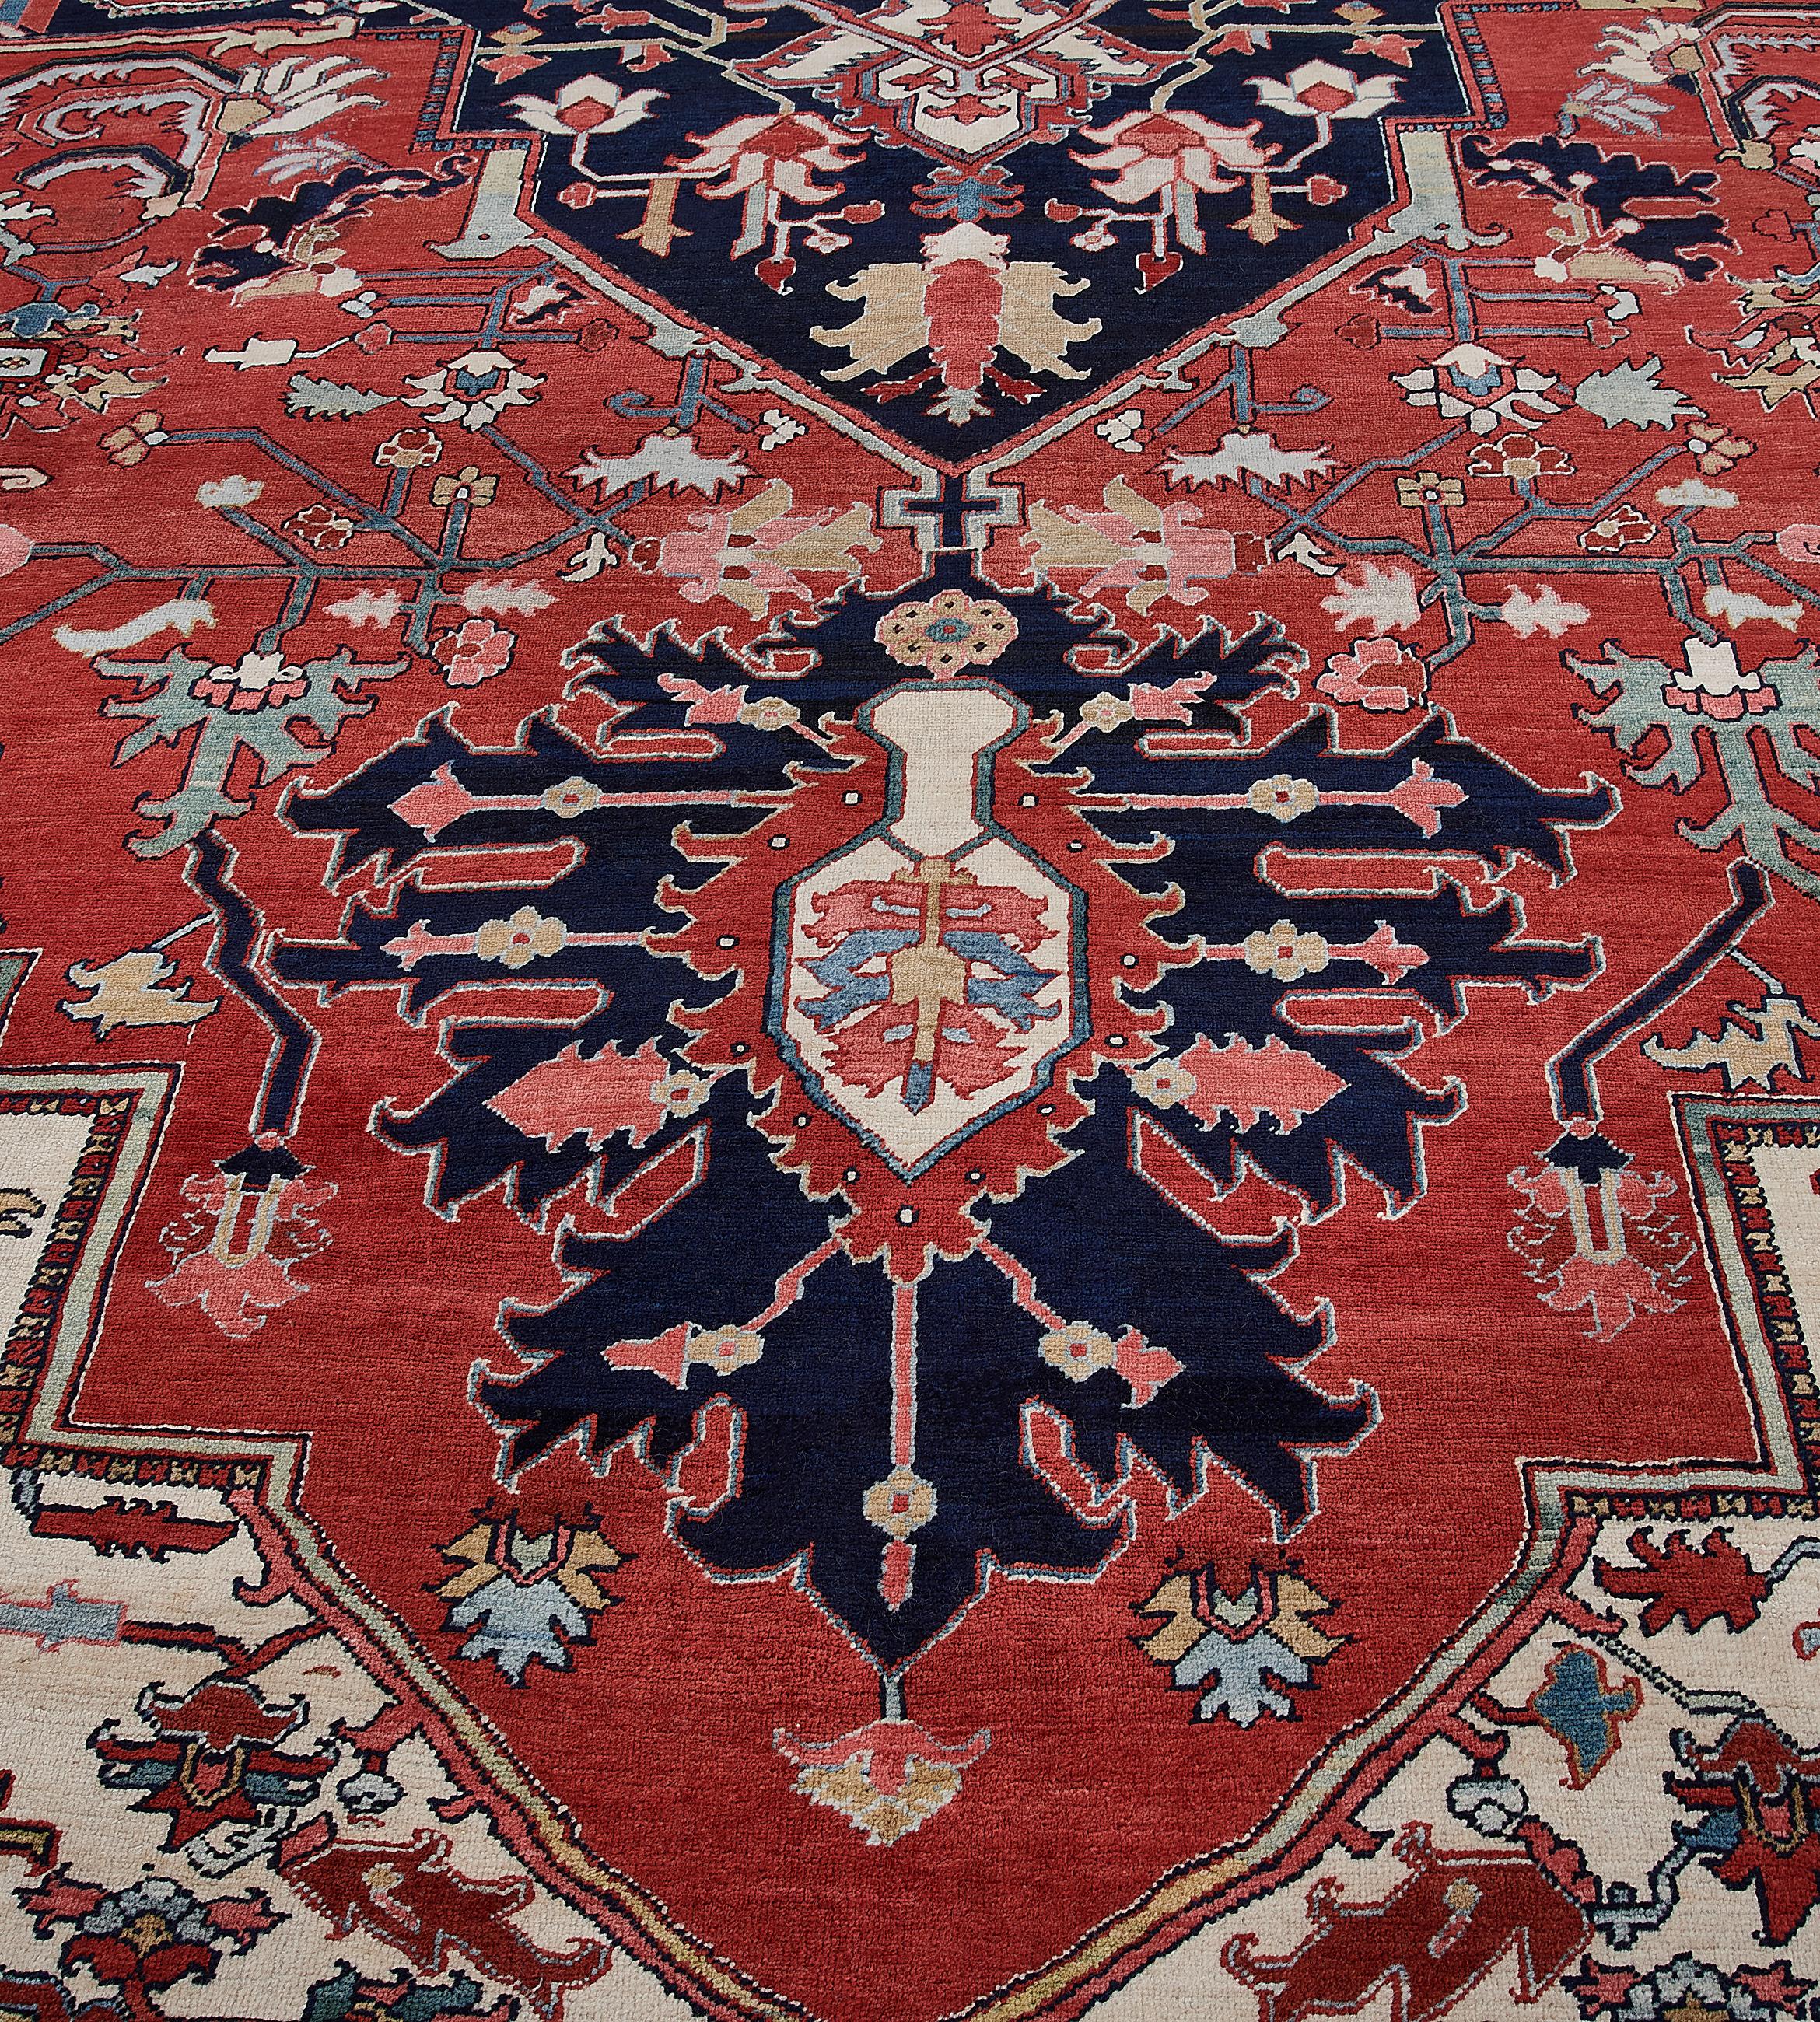 Rare Large-sized Traditional Hand-woven Wool Persian Serapi Rug In Good Condition For Sale In West Hollywood, CA